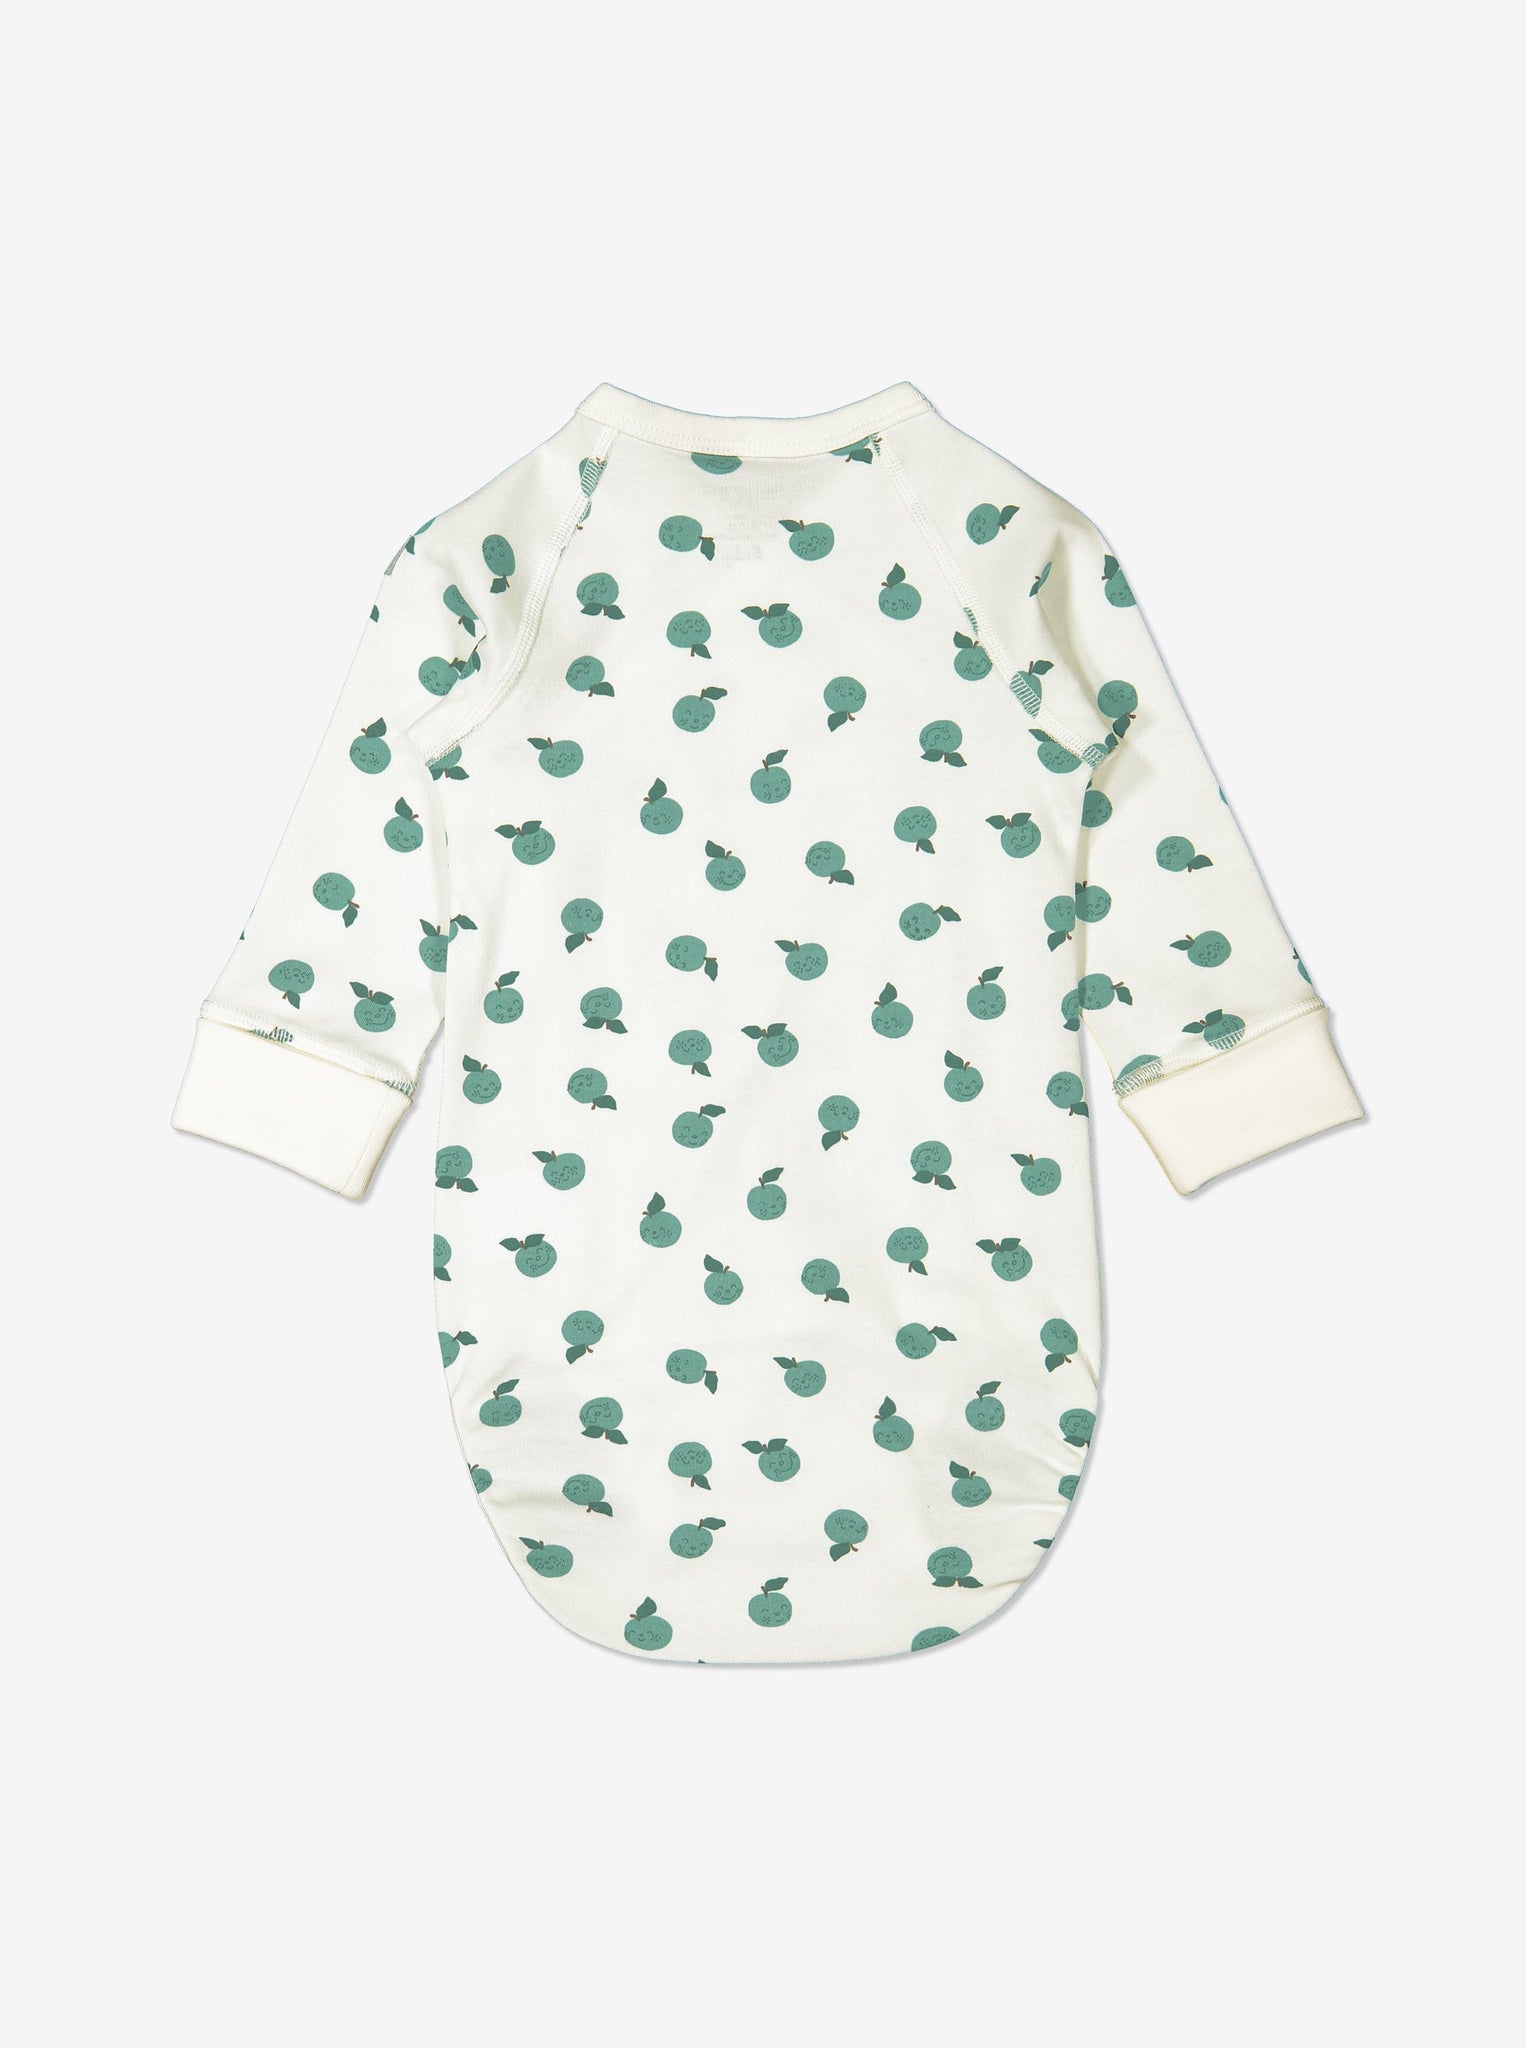 Back view of apple print babygrow for newborn babies in a wraparound style, made from 100% GOTS organic cotton fabric